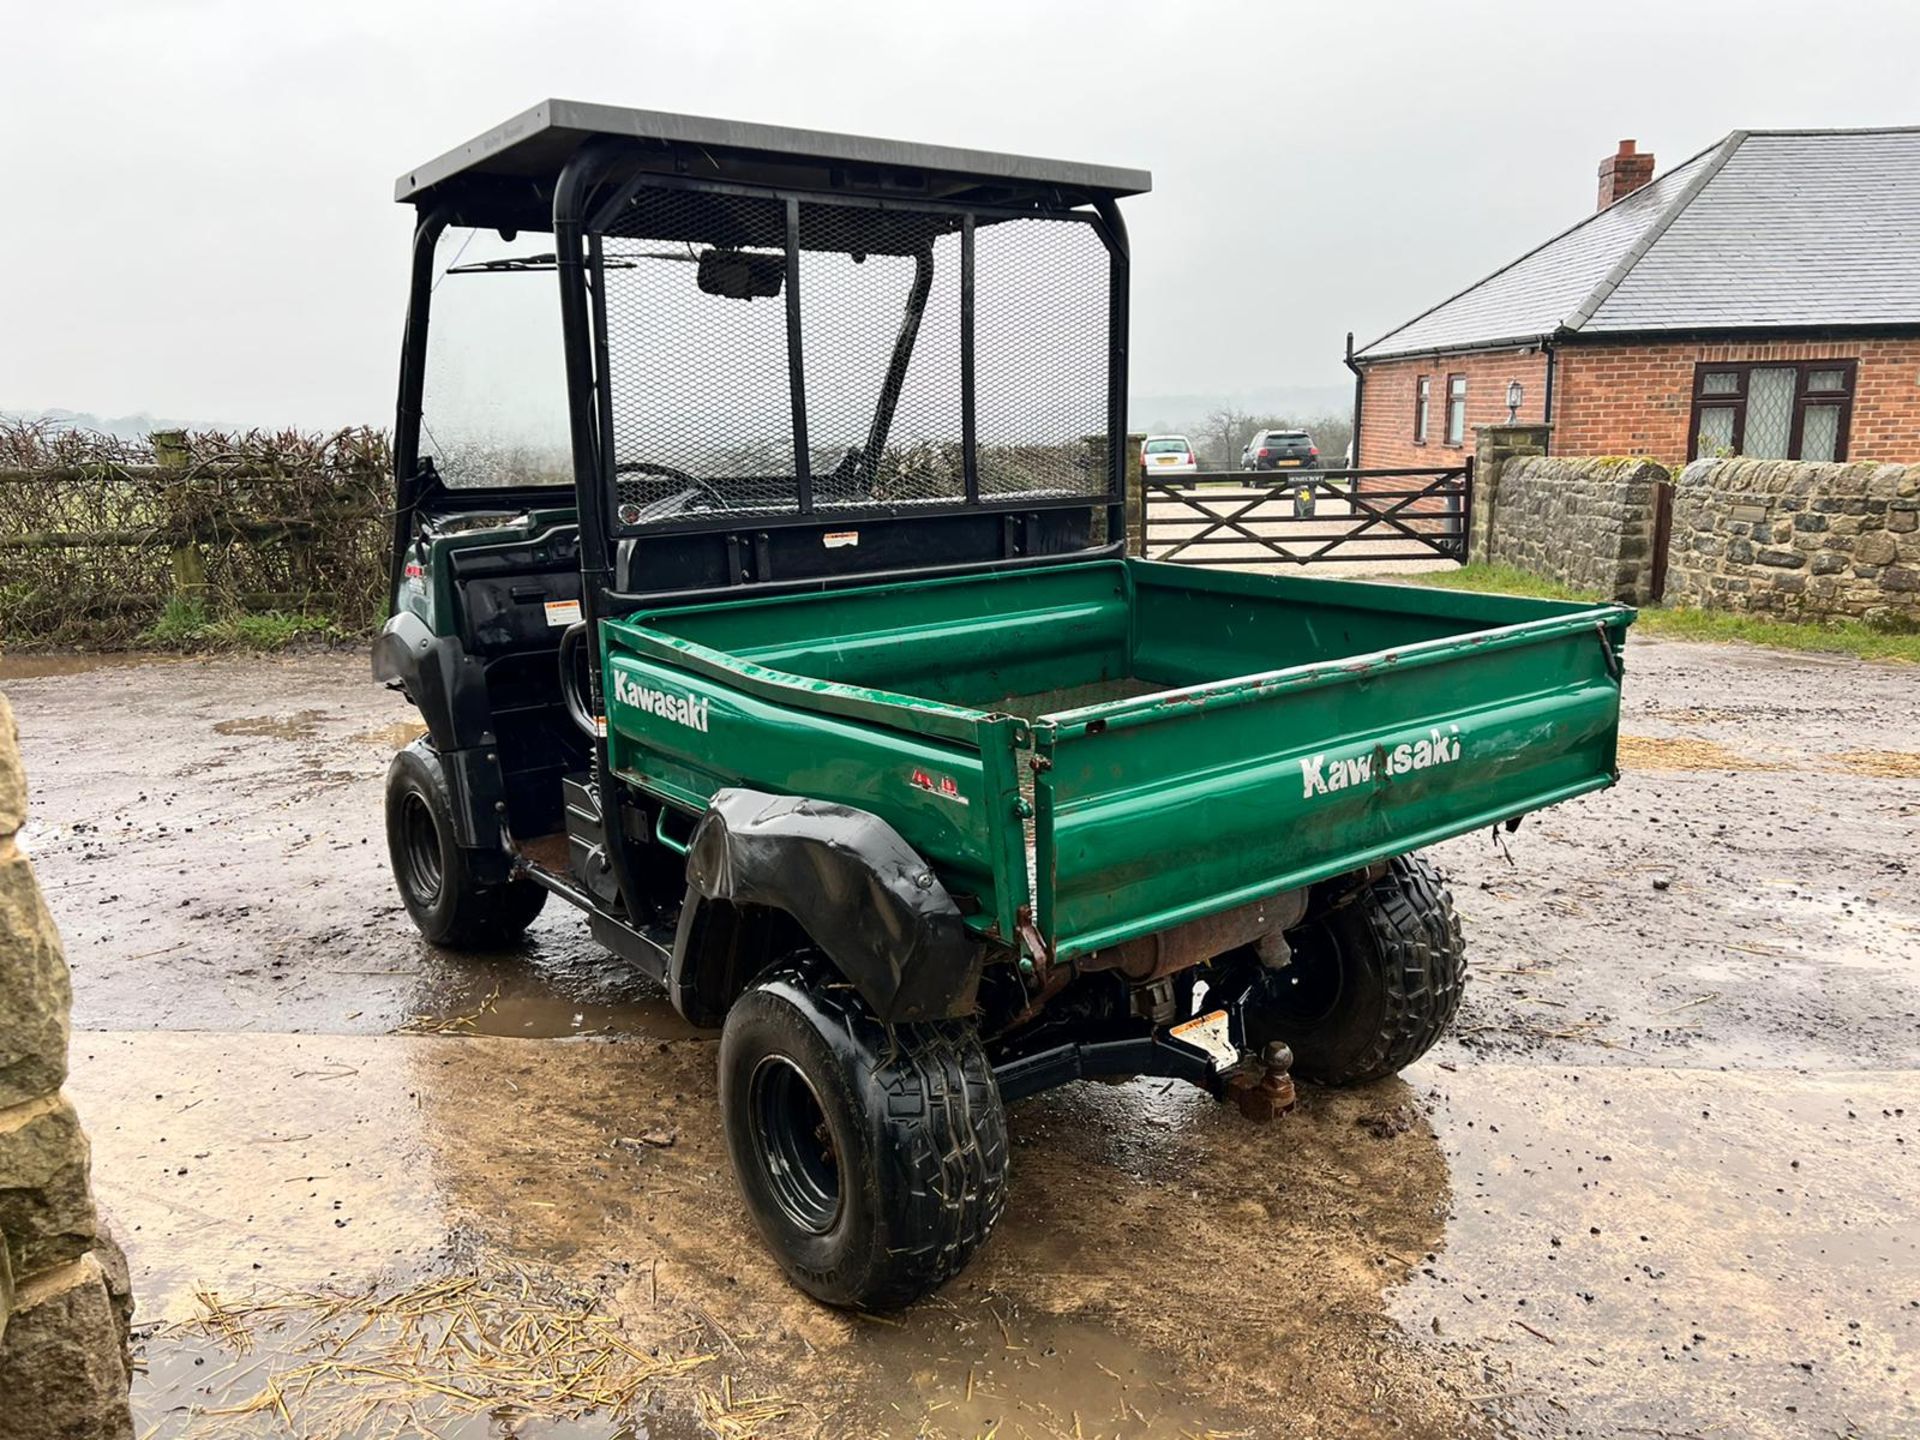 2009 Kawasaki Mule 4010 Buggy, Runs And Drives, Showing A Low 2425 Hours! *PLUS VAT* - Image 3 of 11